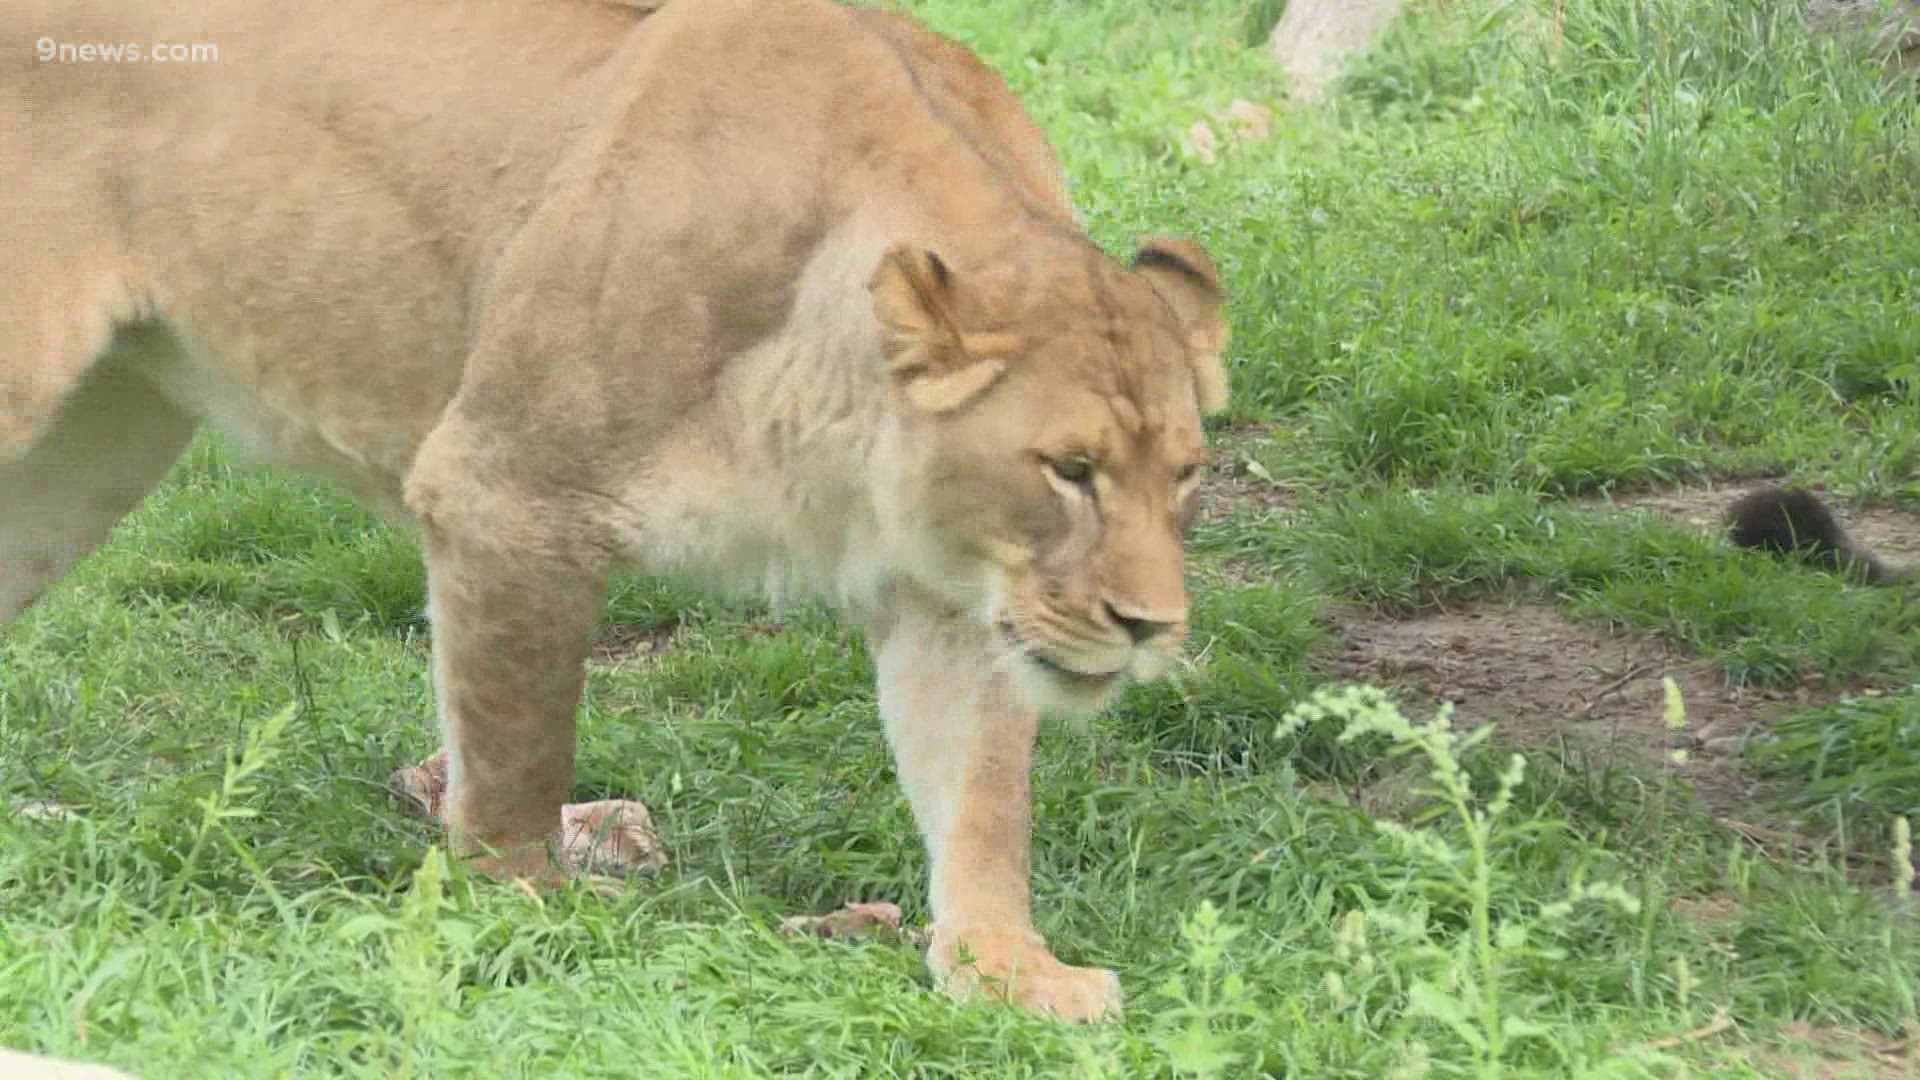 Some animals housed at the Denver Zoo will begin receiving vaccinations against COVID-19.